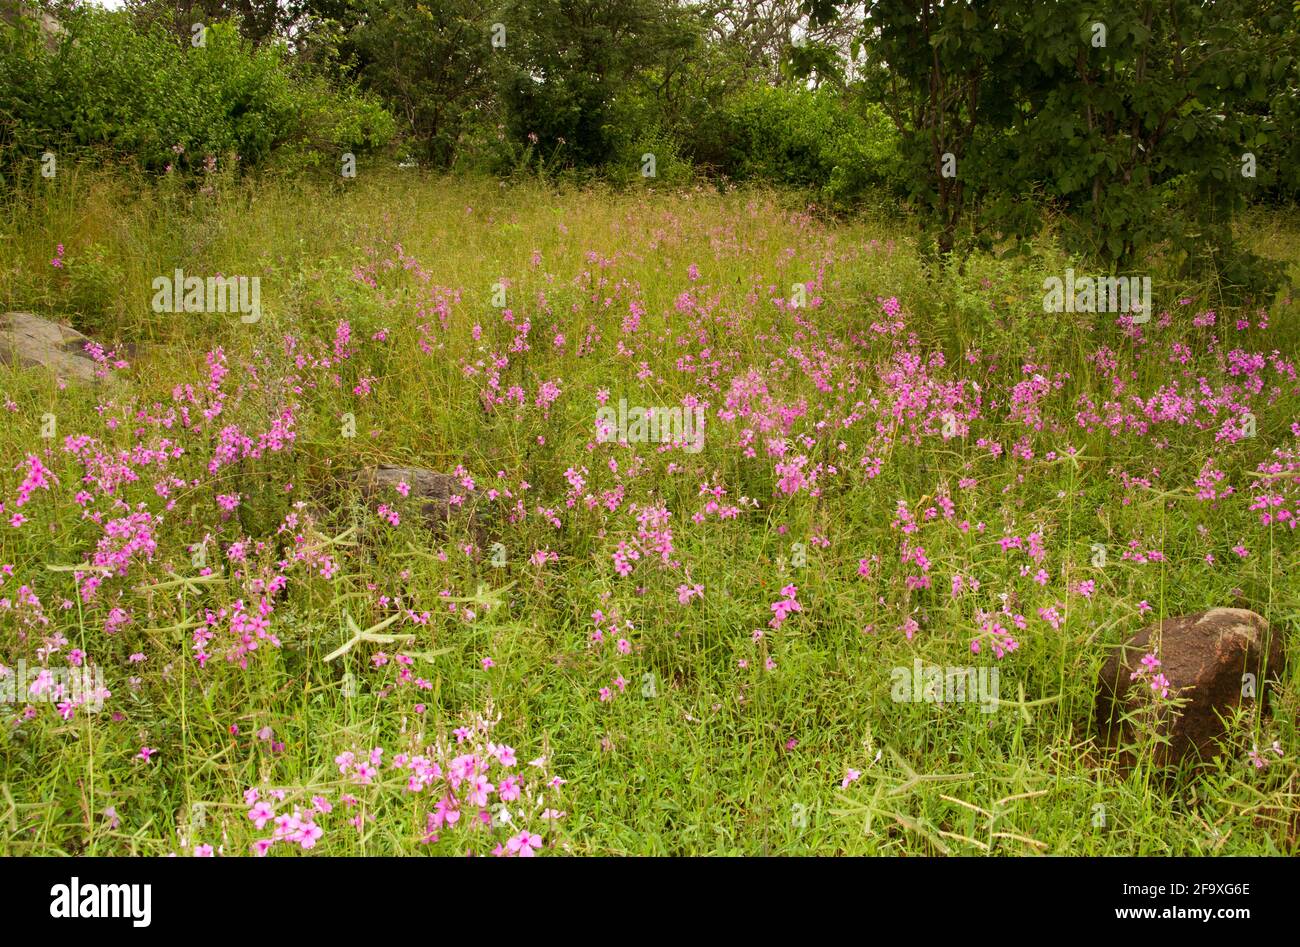 The delicate bright pink flowers of the Pink Ink Plant usually indicate disturbed, poor quality soils. They are parasitic on some grasses Stock Photo